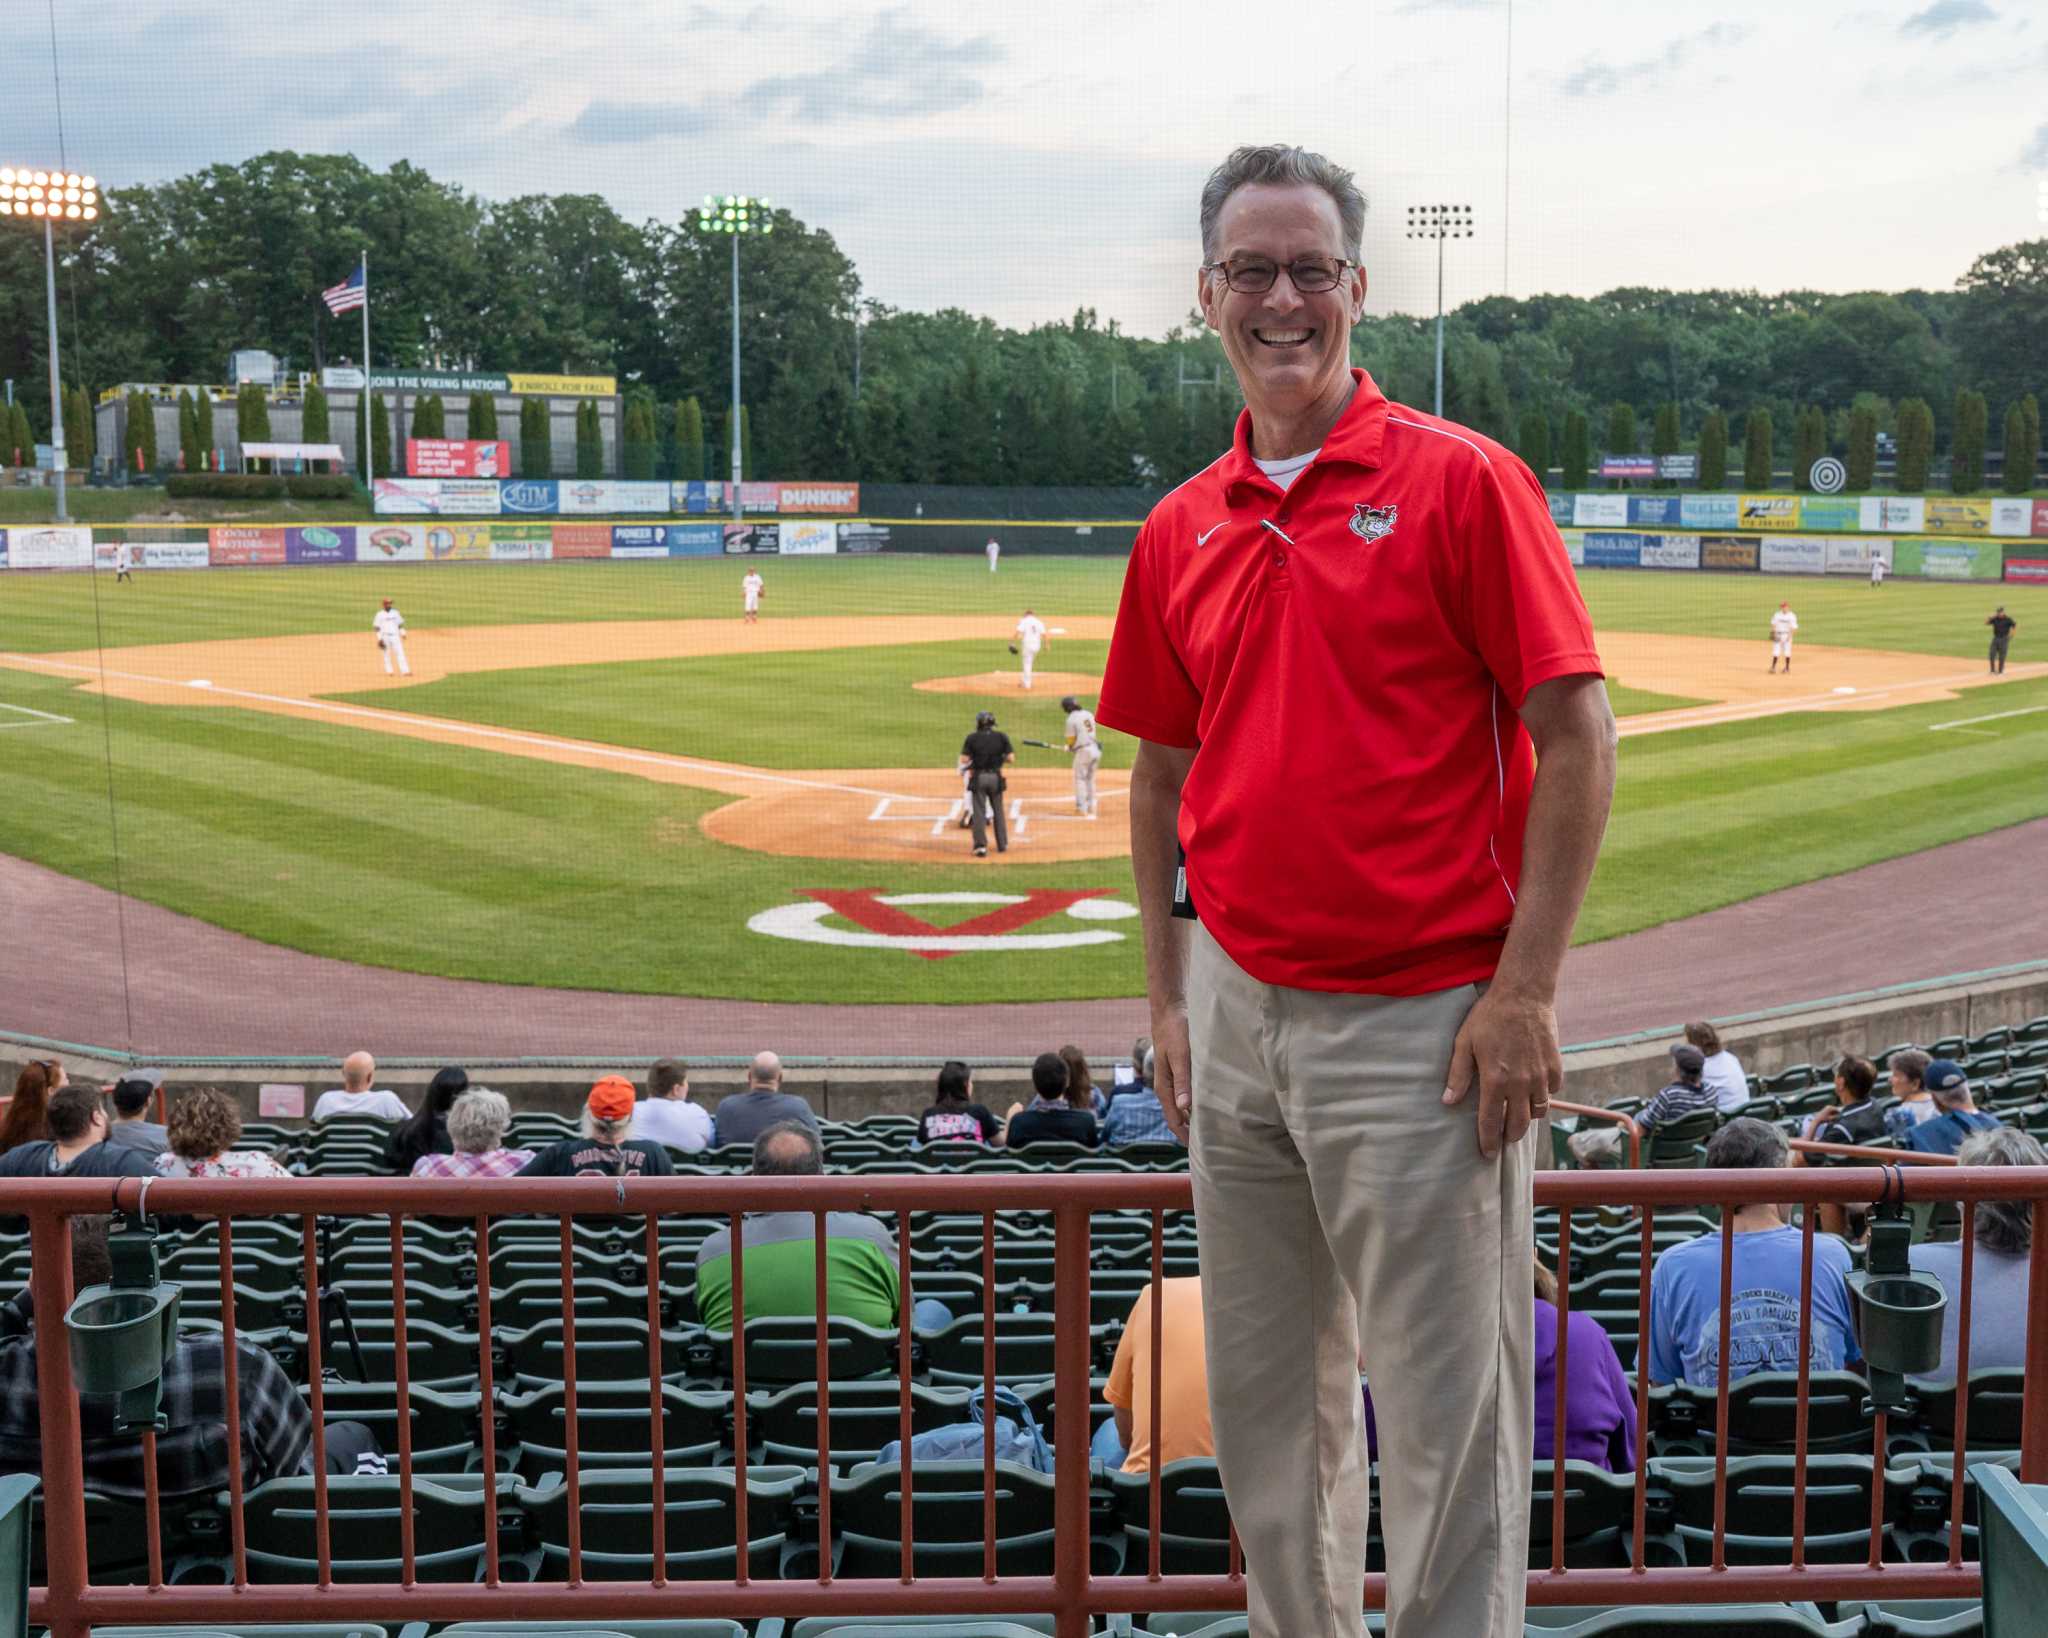 ValleyCats intend to stay in Frontier League through 2026